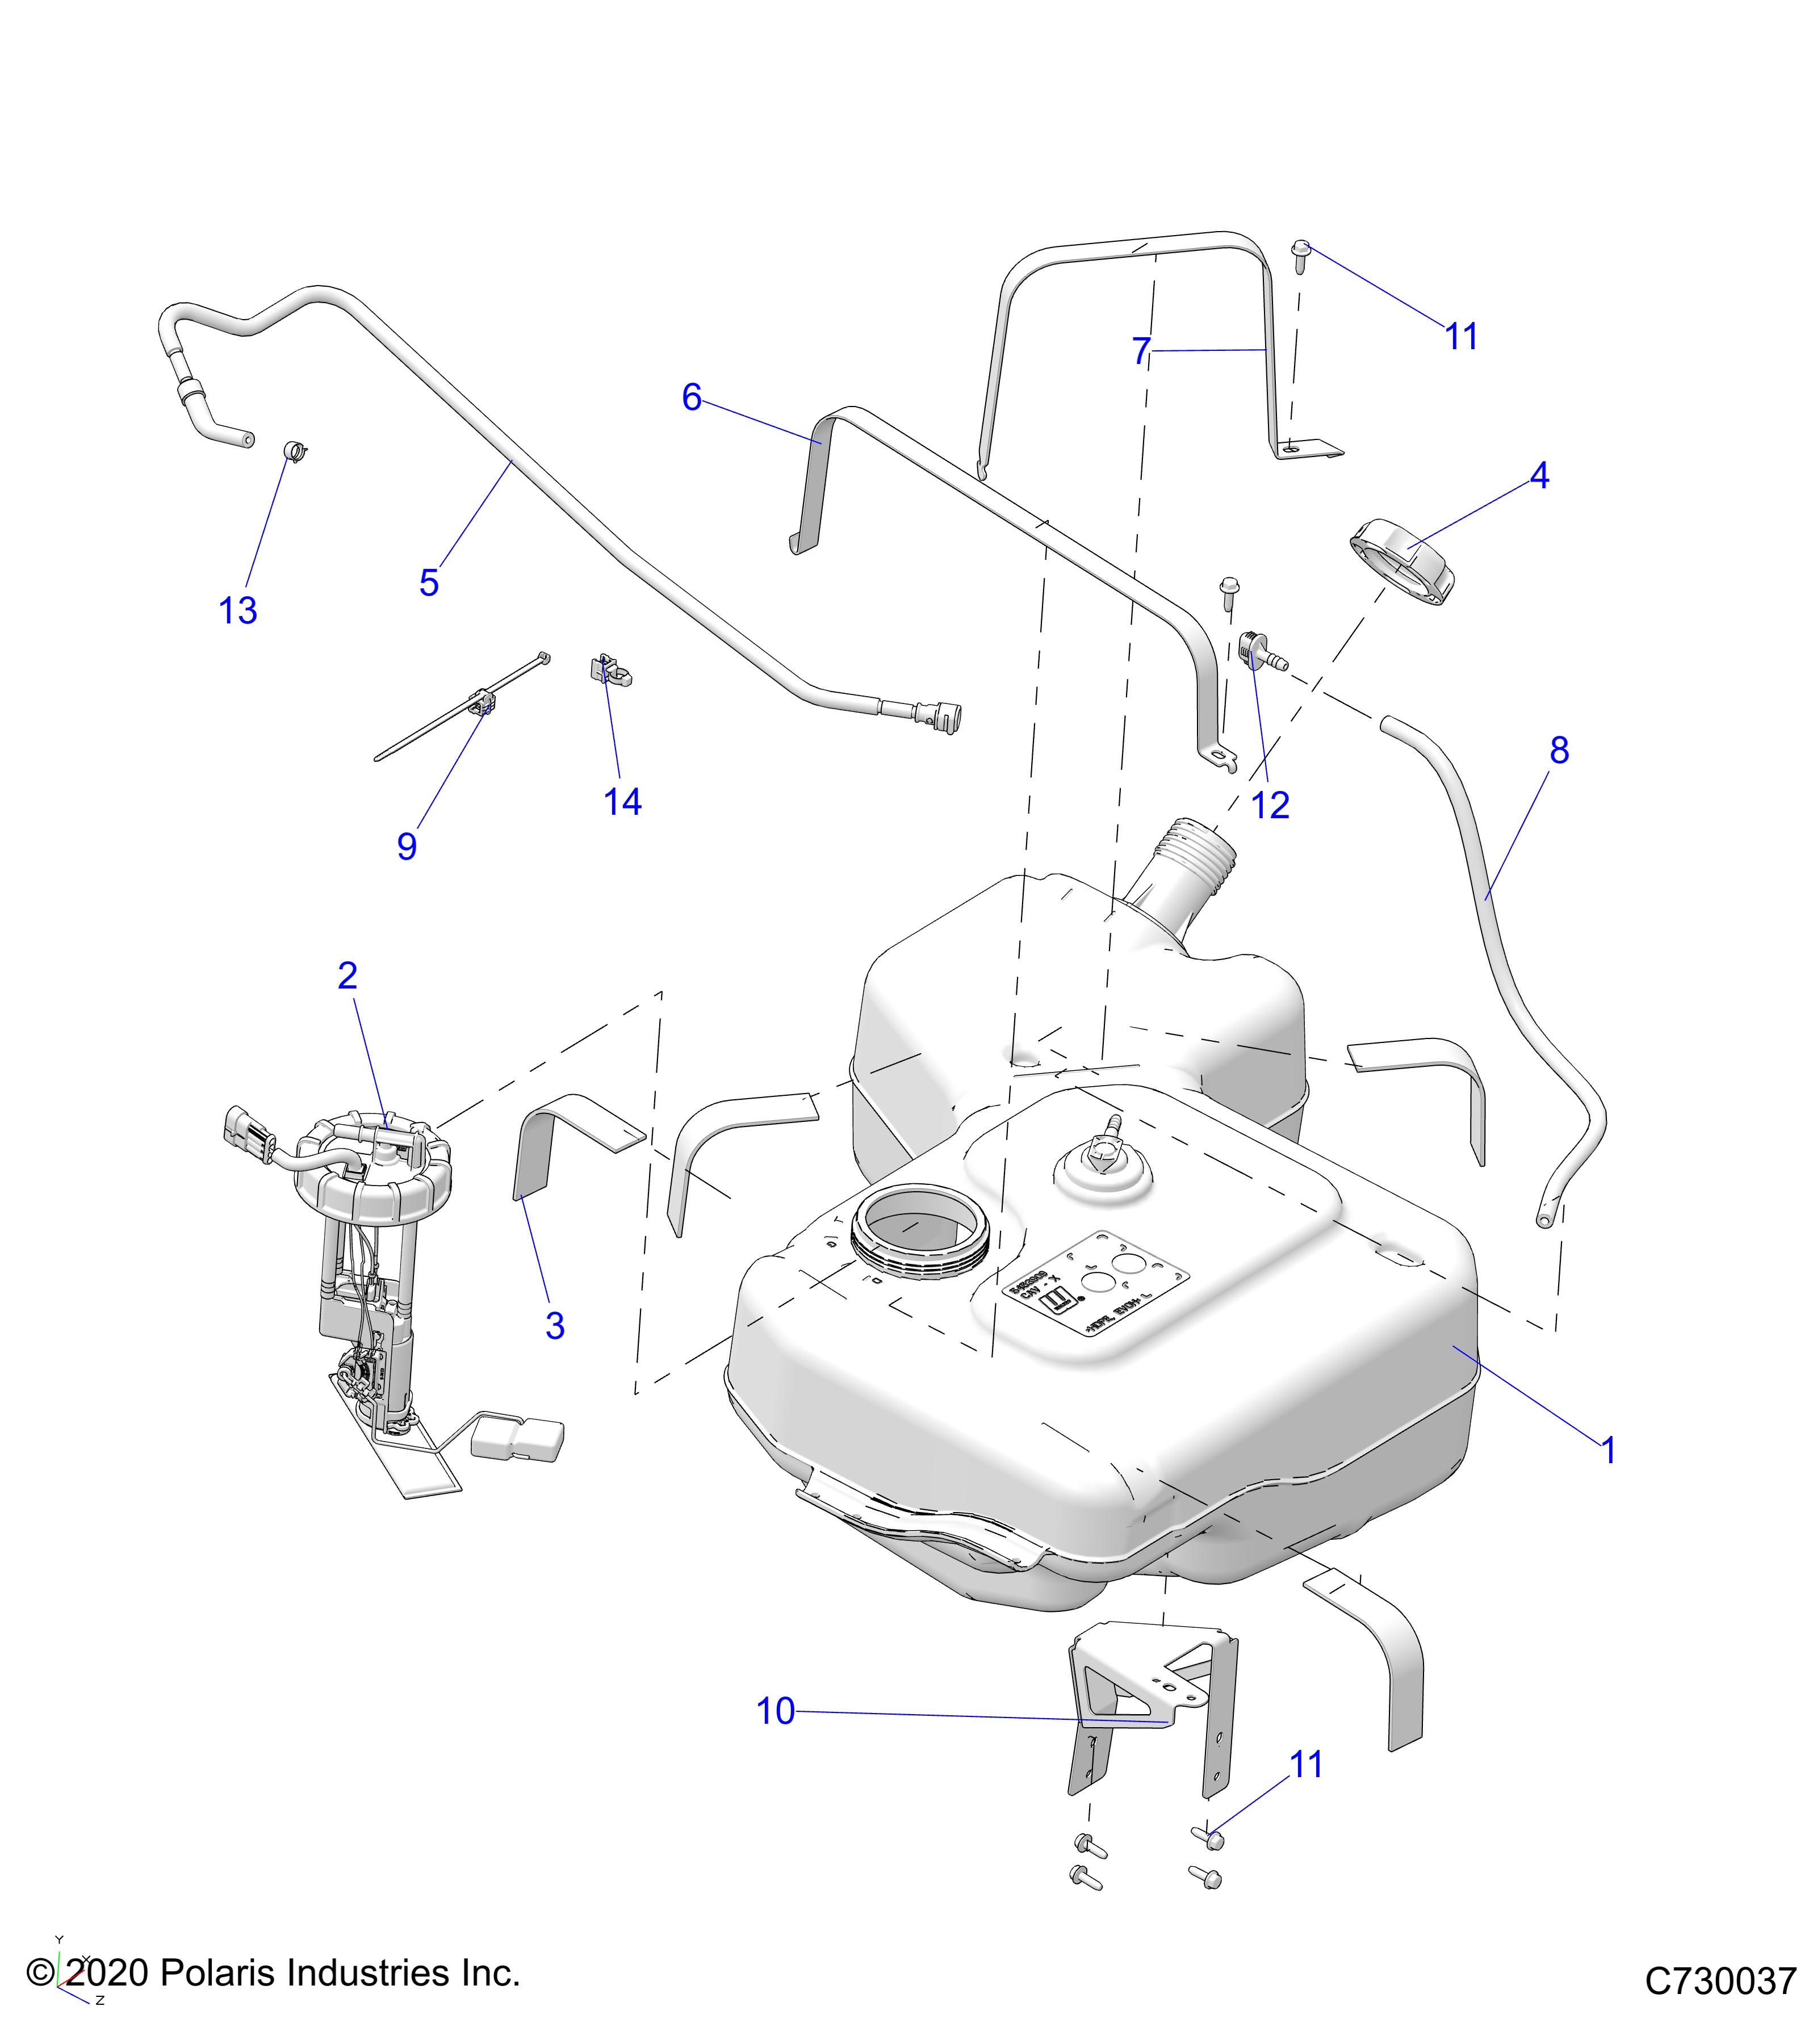 Part Number : 2521981 FUEL TANK ASSEMBLY